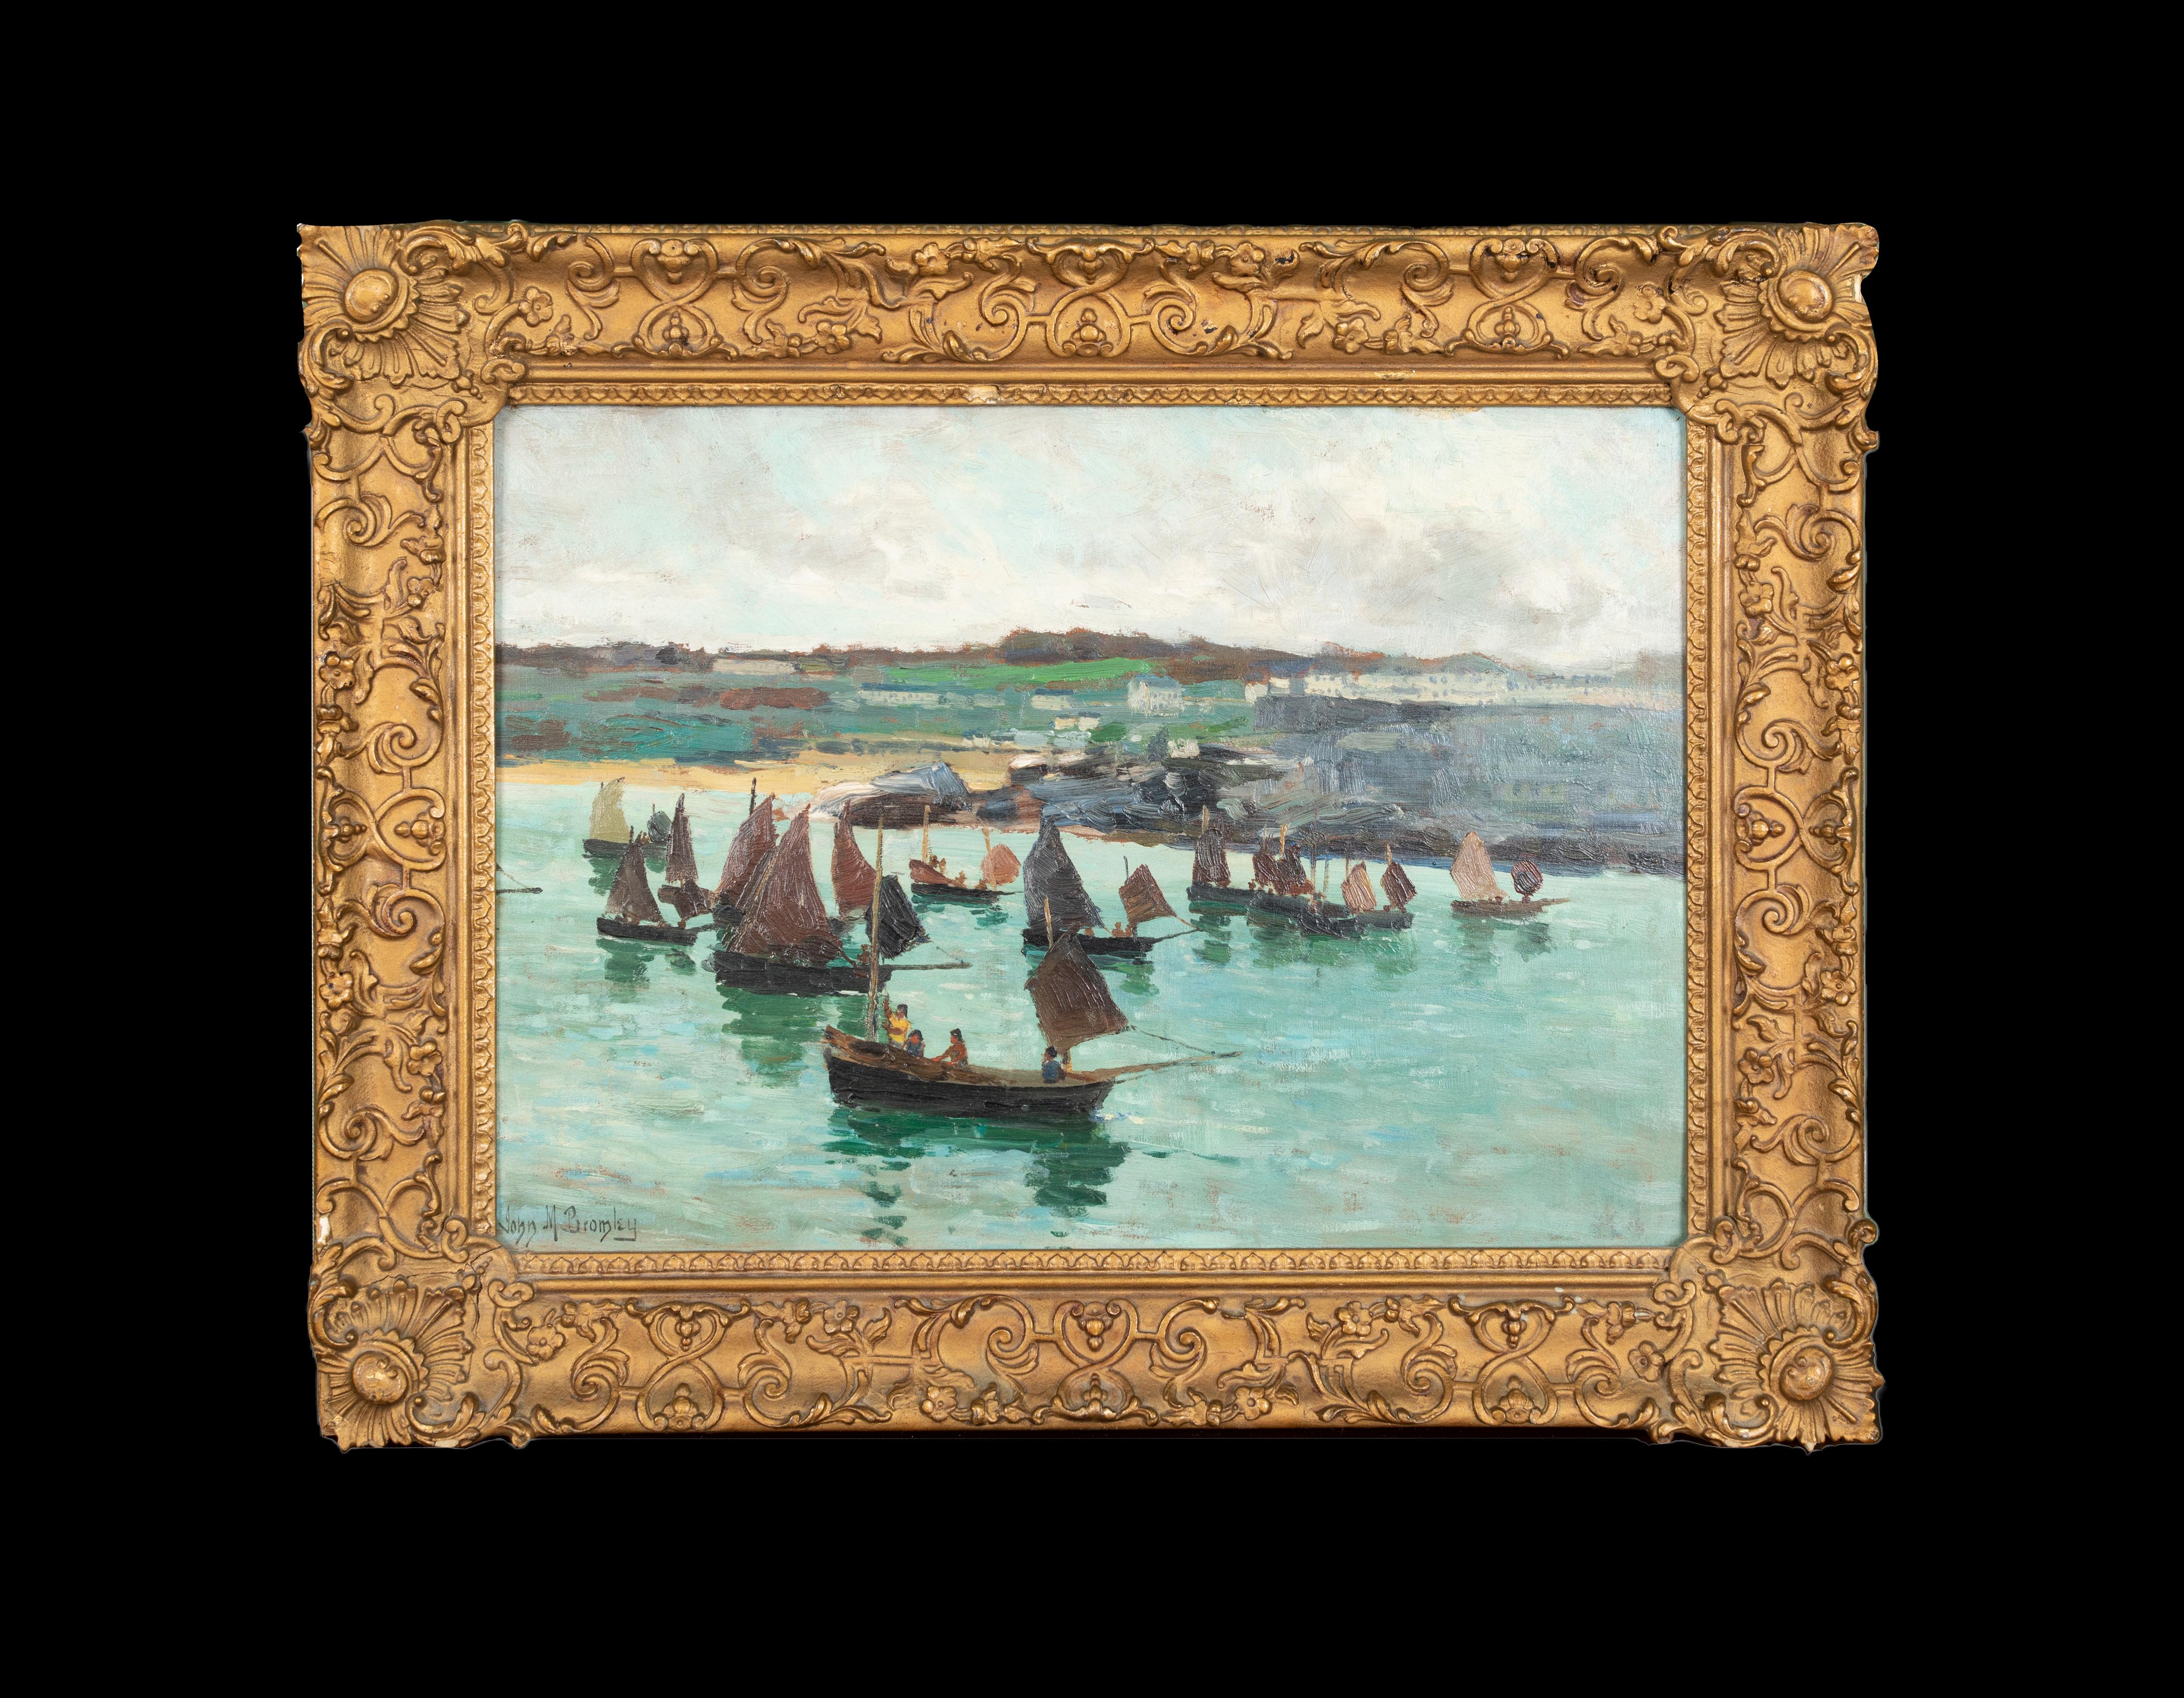 The Fishing Fleet Off Pedn Olva, circa 1900

by John Mallard BROMLEY (1858-1939) simalr to £5,000

Circa 1900 view of a fishing fleet of Pedn Olva, Saint Ives, oil on panel by John Mallard. Excellent quality and condition study of the artists work